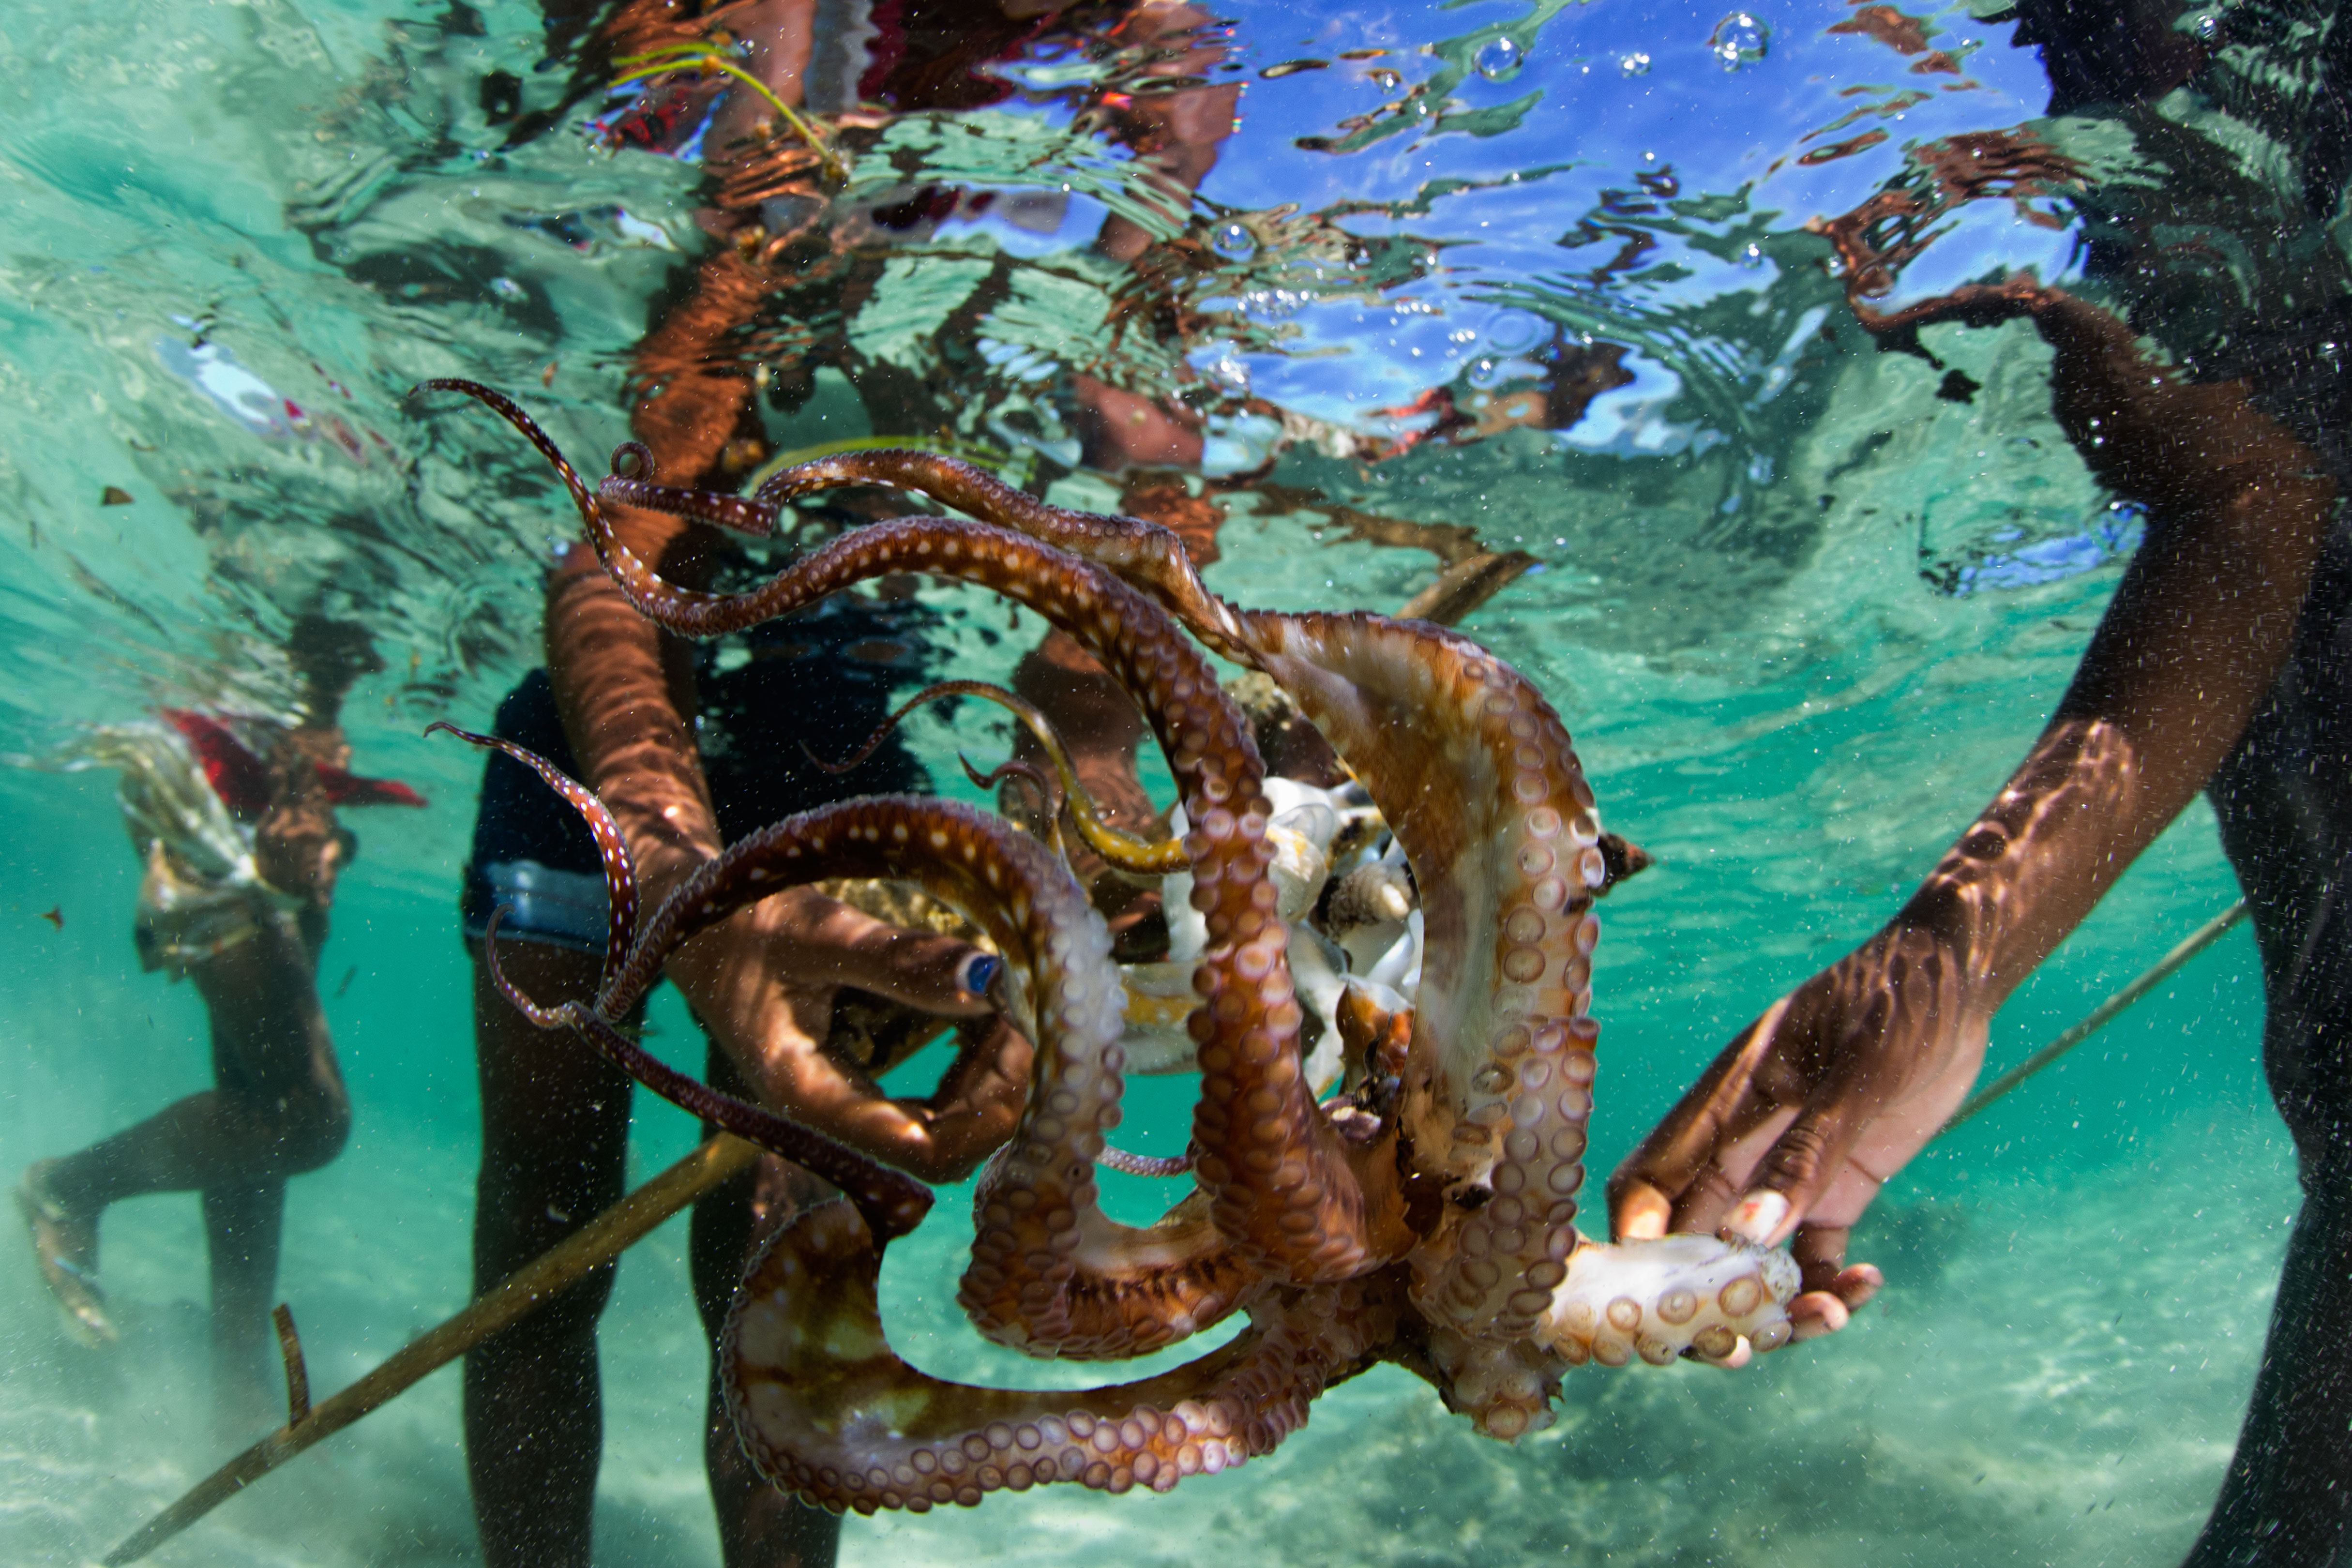 The reef octopus is a cash crop for tens of thousands of subsistence fishers in the Indian Ocean, providing a foot in the door for Blue Ventures' "community catalyst" approach to conservation. Photo: Garth Cripps